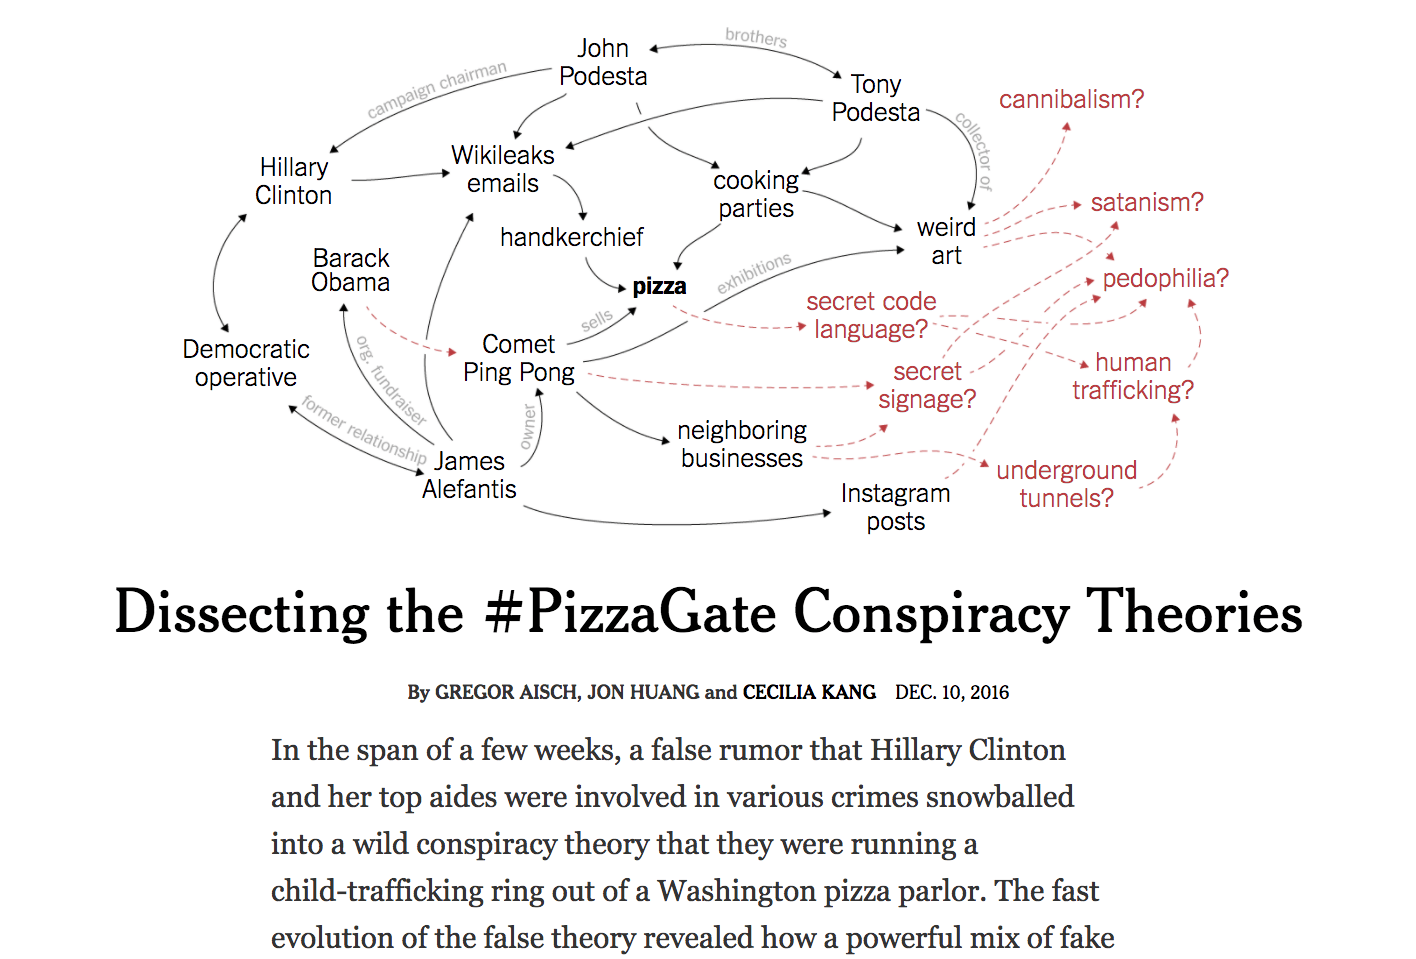 Dissecting the #PizzaGate Conspiracy Theories